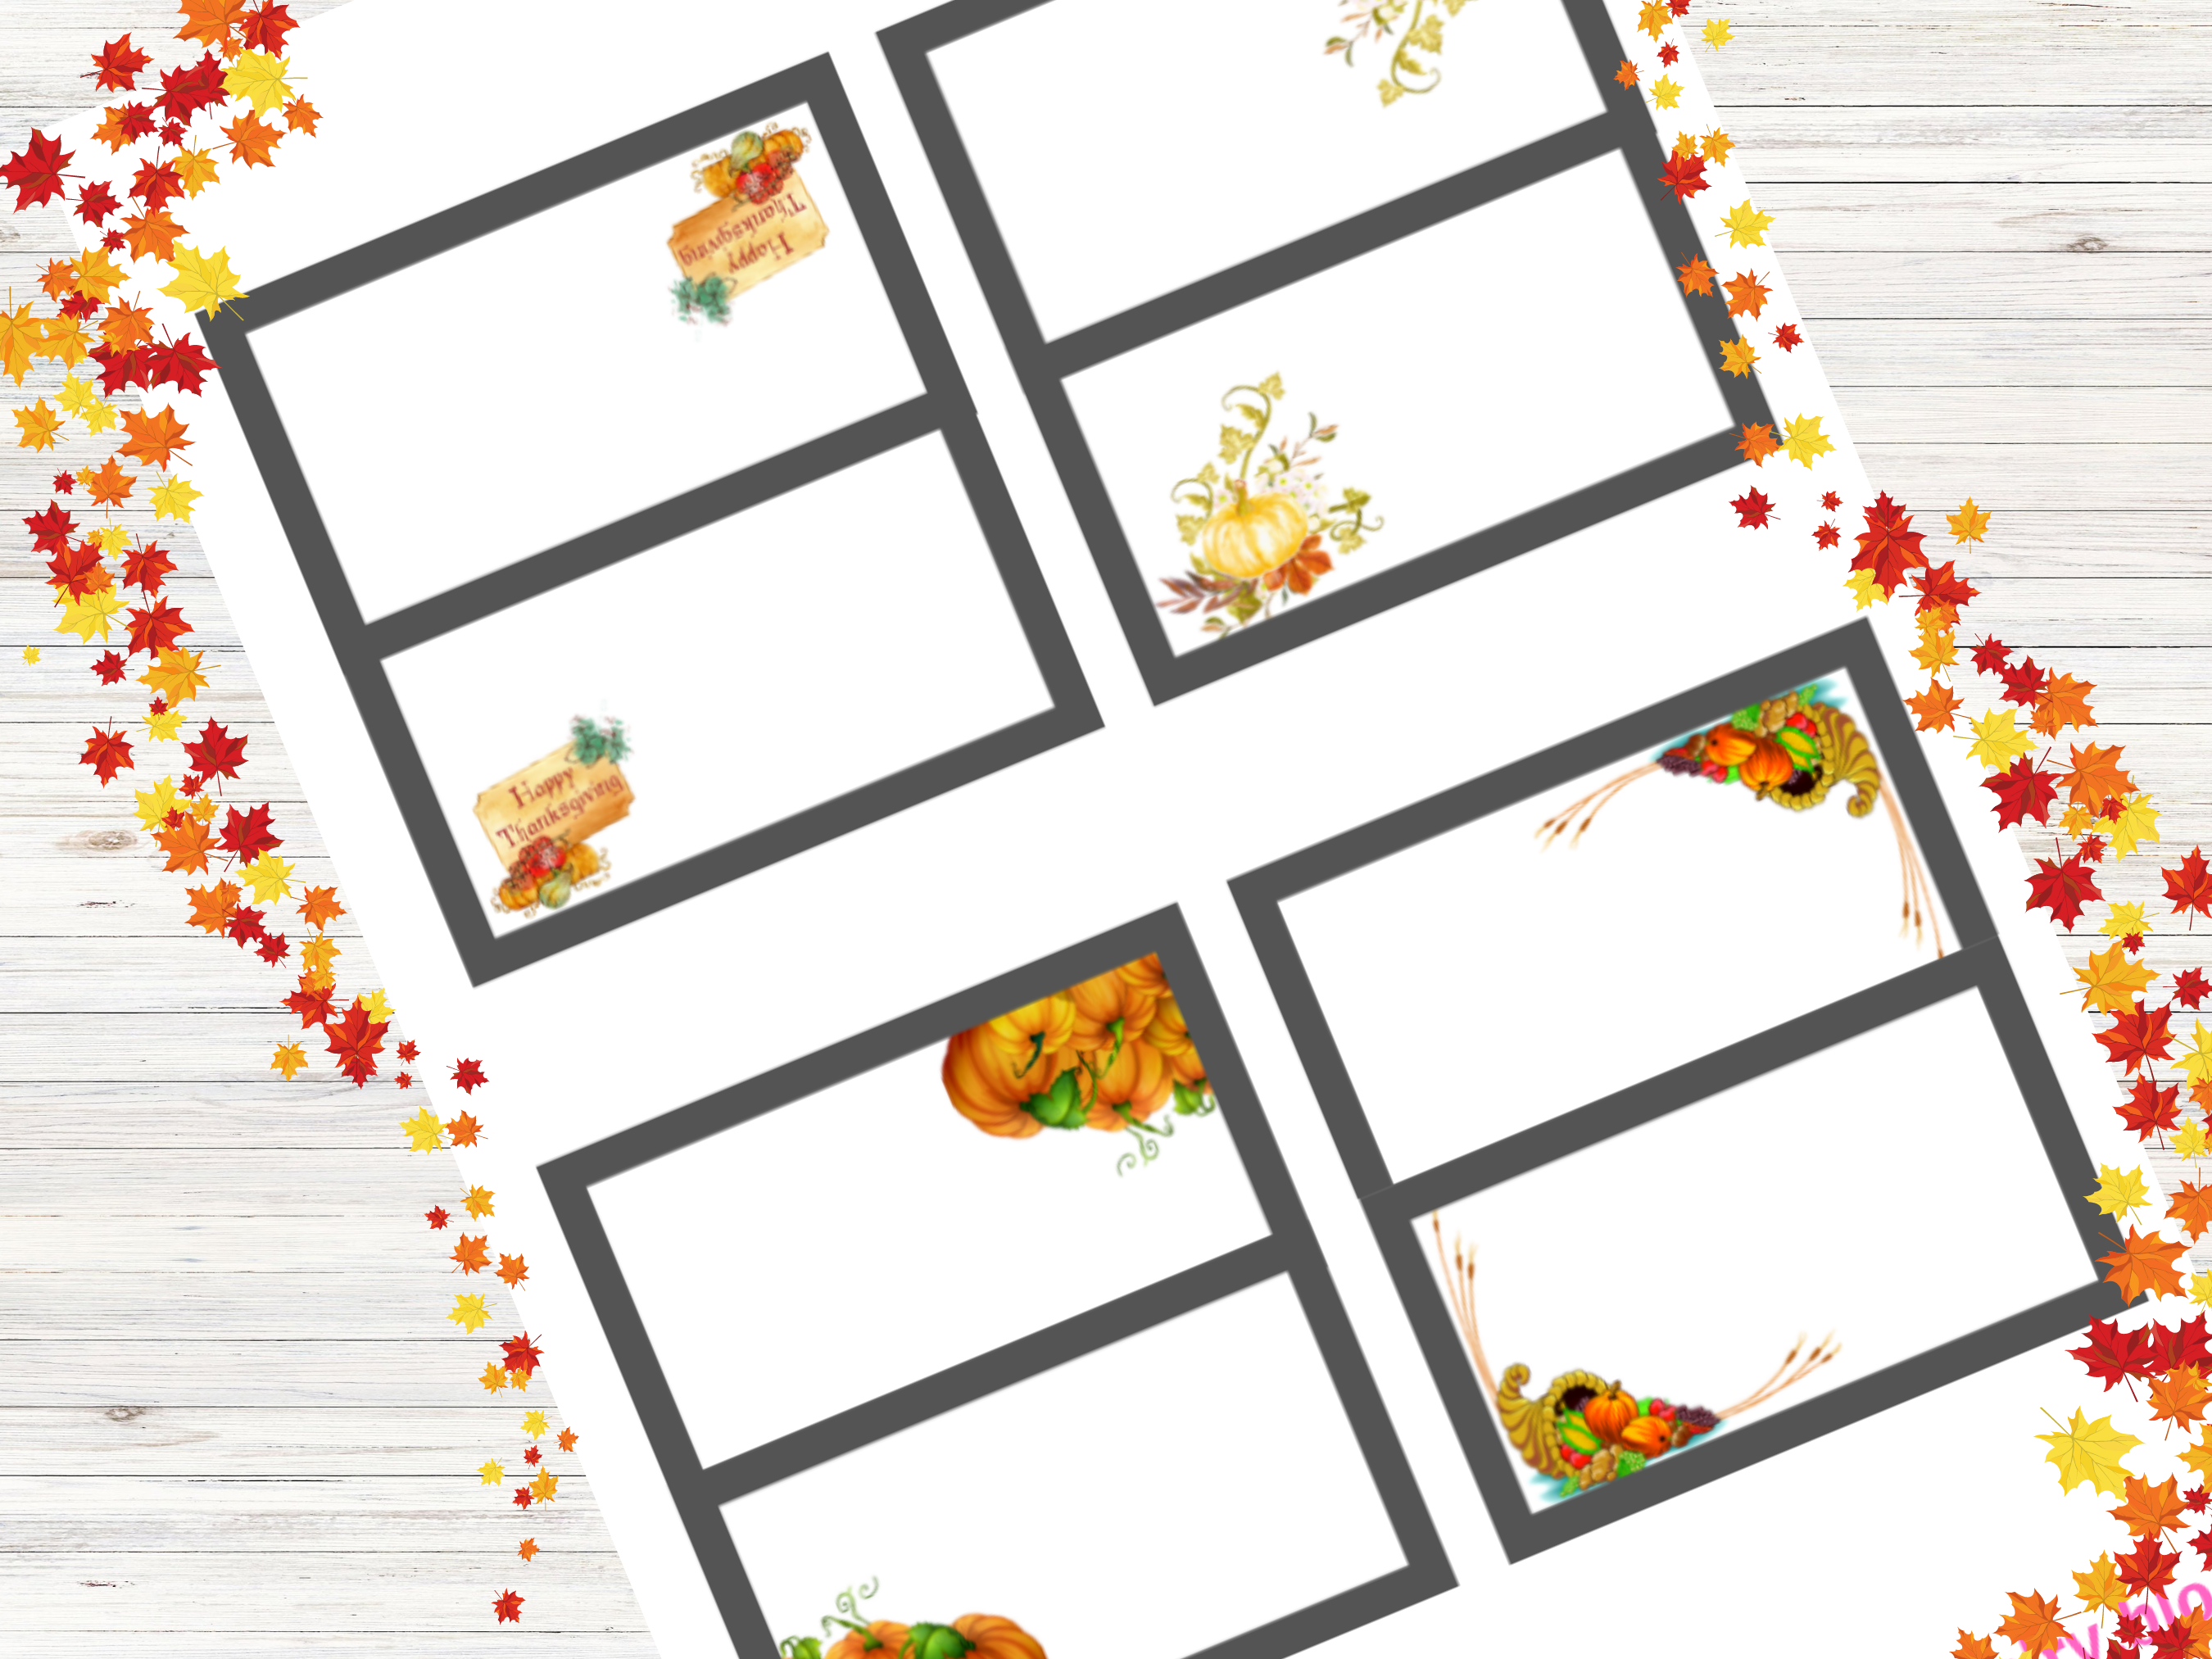 Printable place or gift cards for Thanksgiving